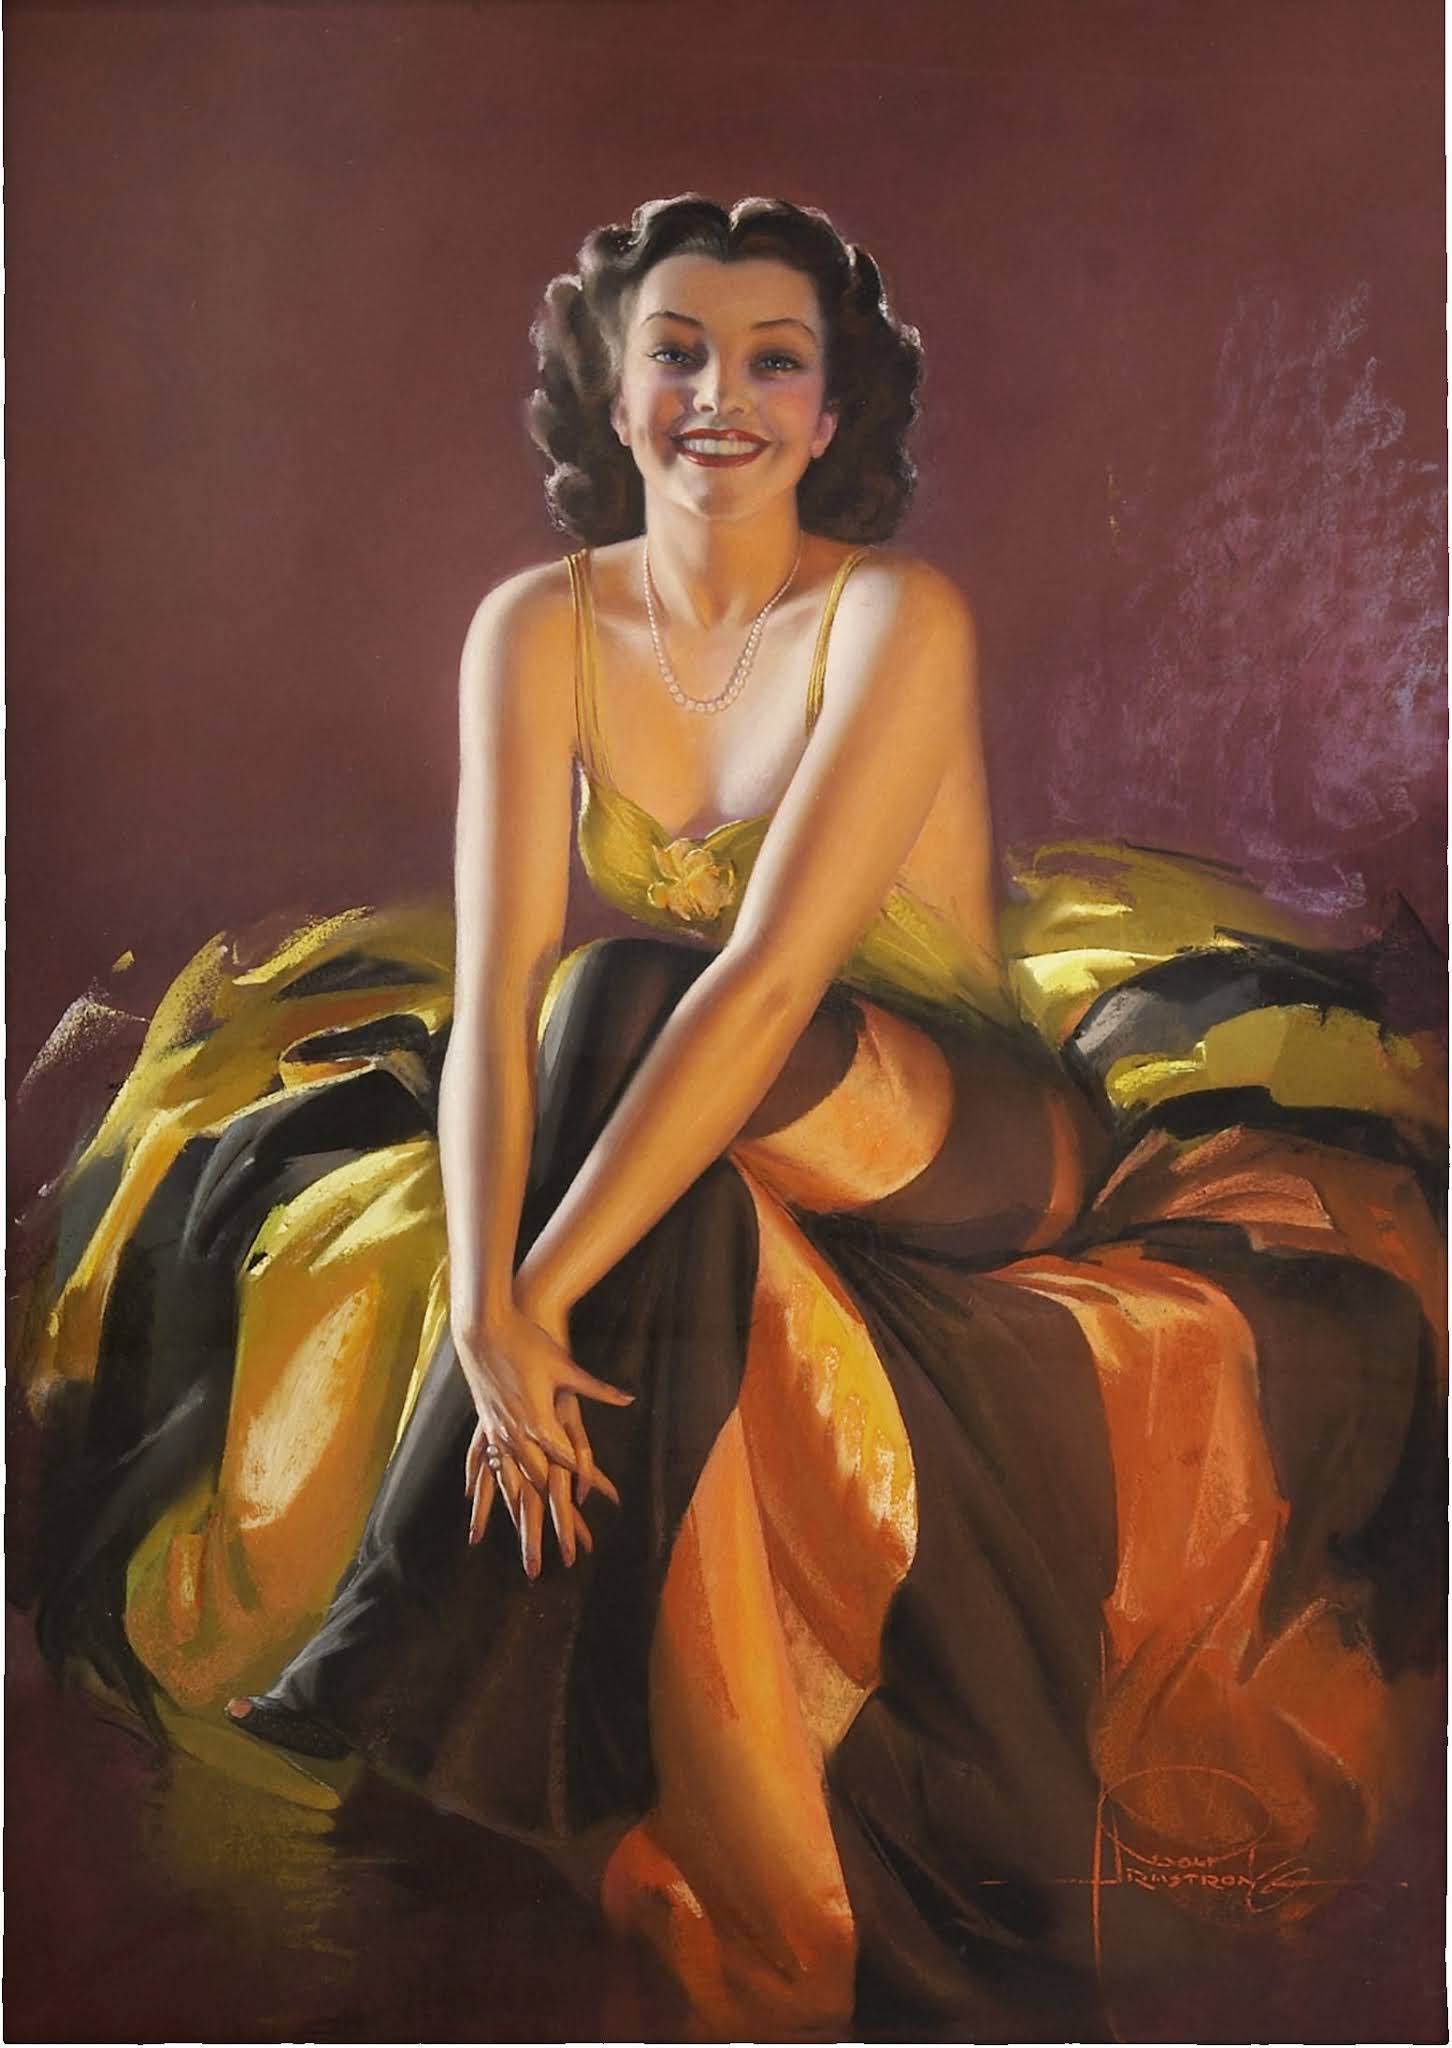 Rolf ARMSTRONG ~ Pin-up Art - Catherine La Rose (6)